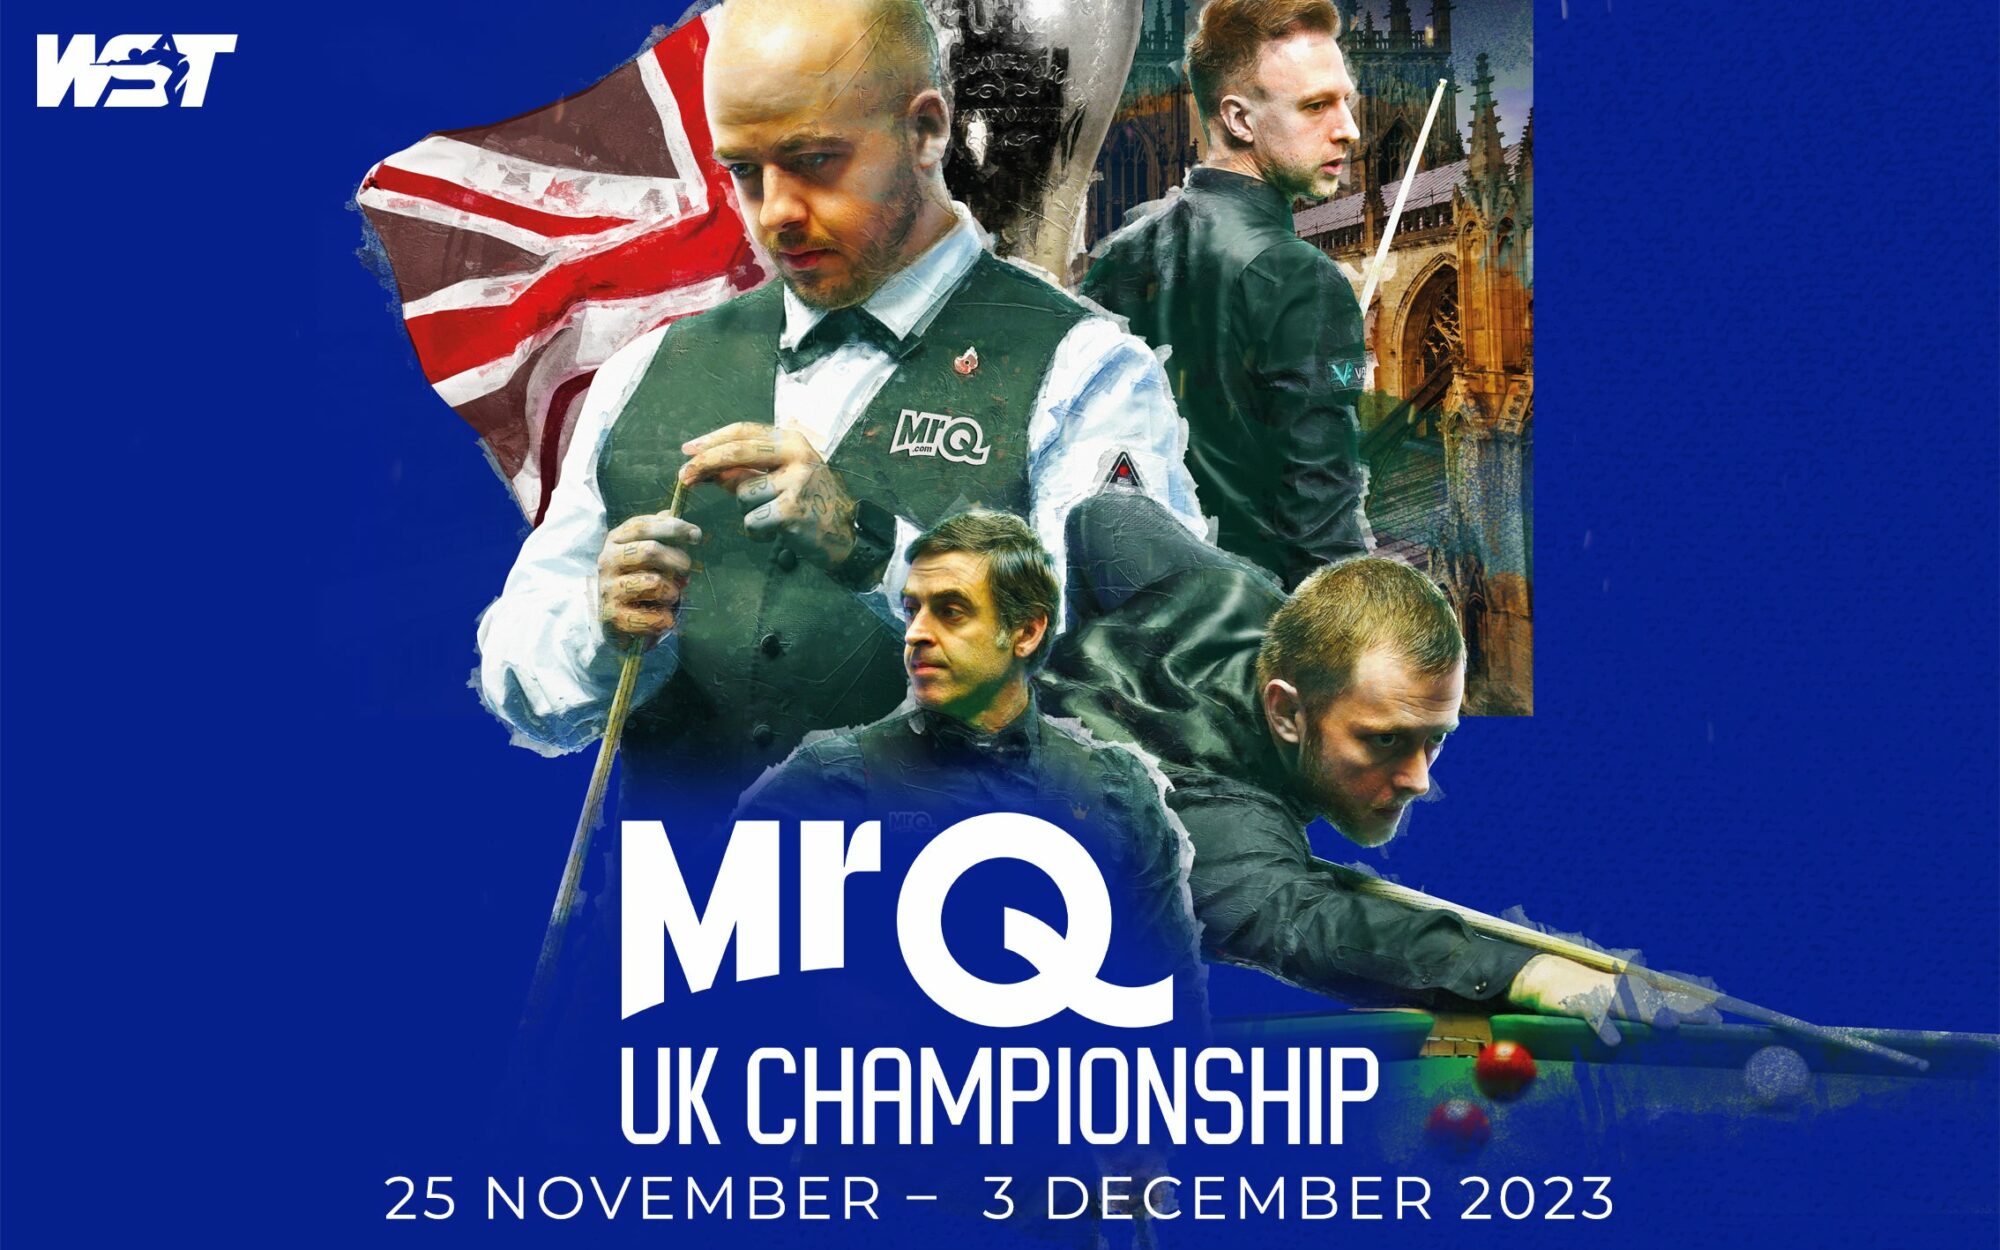 Image name MrQ UK Championship Snooker Evening at York Barbican York 1 the 3 image from the post MrQ UK Championship Snooker - All Day at York Barbican, York in Yorkshire.com.